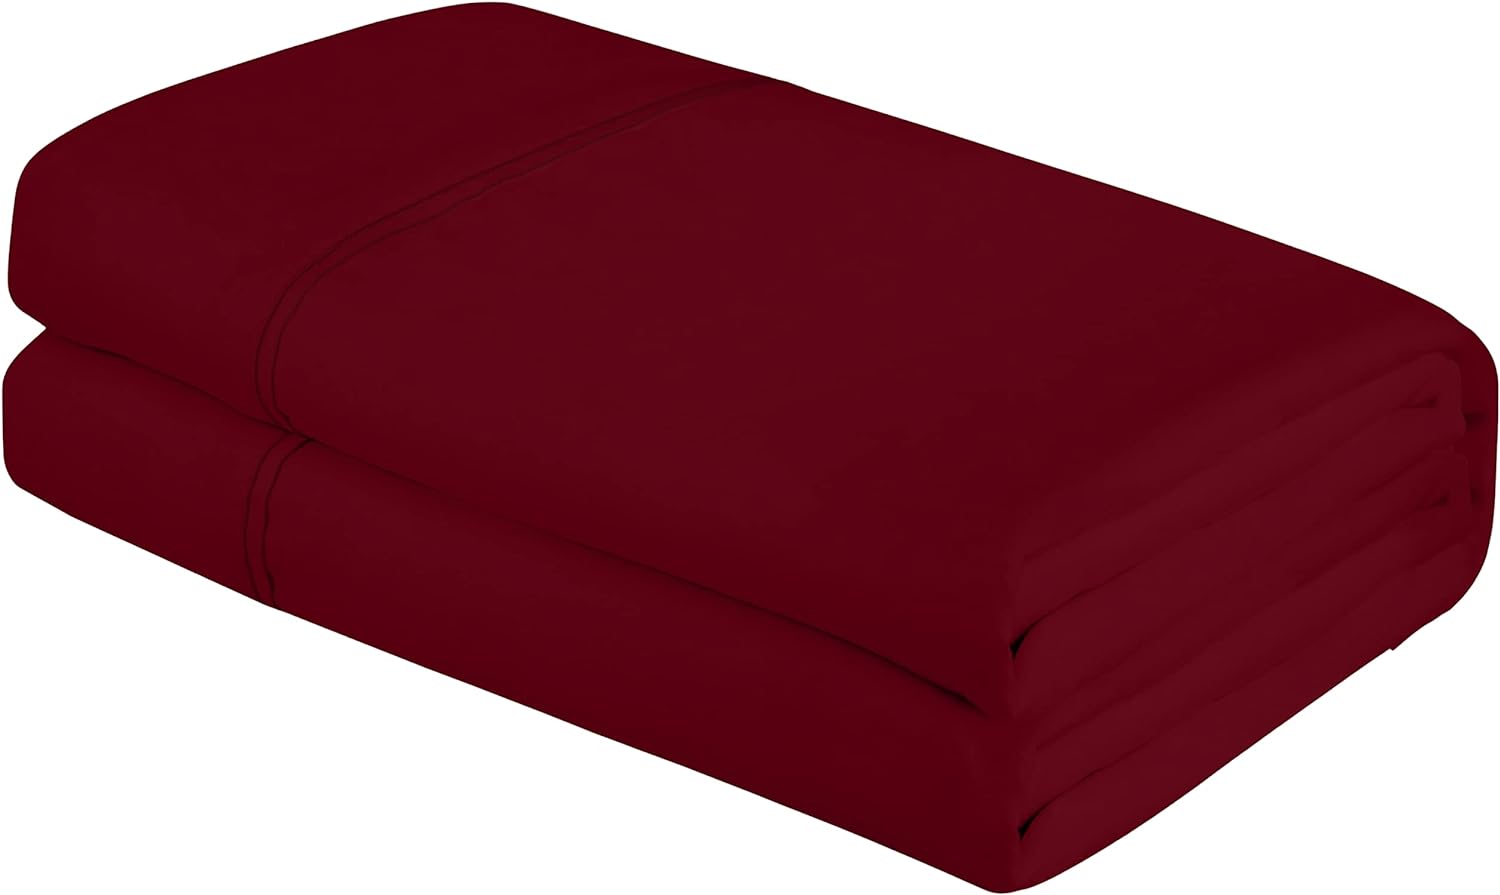 Royale Linens Queen Size Flat Sheet Only - Brushed 1800 Microfiber - Ultra Soft & Breathable - Wrinkle & Stain Resistant - Hotel Quality Flat Sheet Sold Separately - Top Sheet for Bed(Queen,Burgundy)